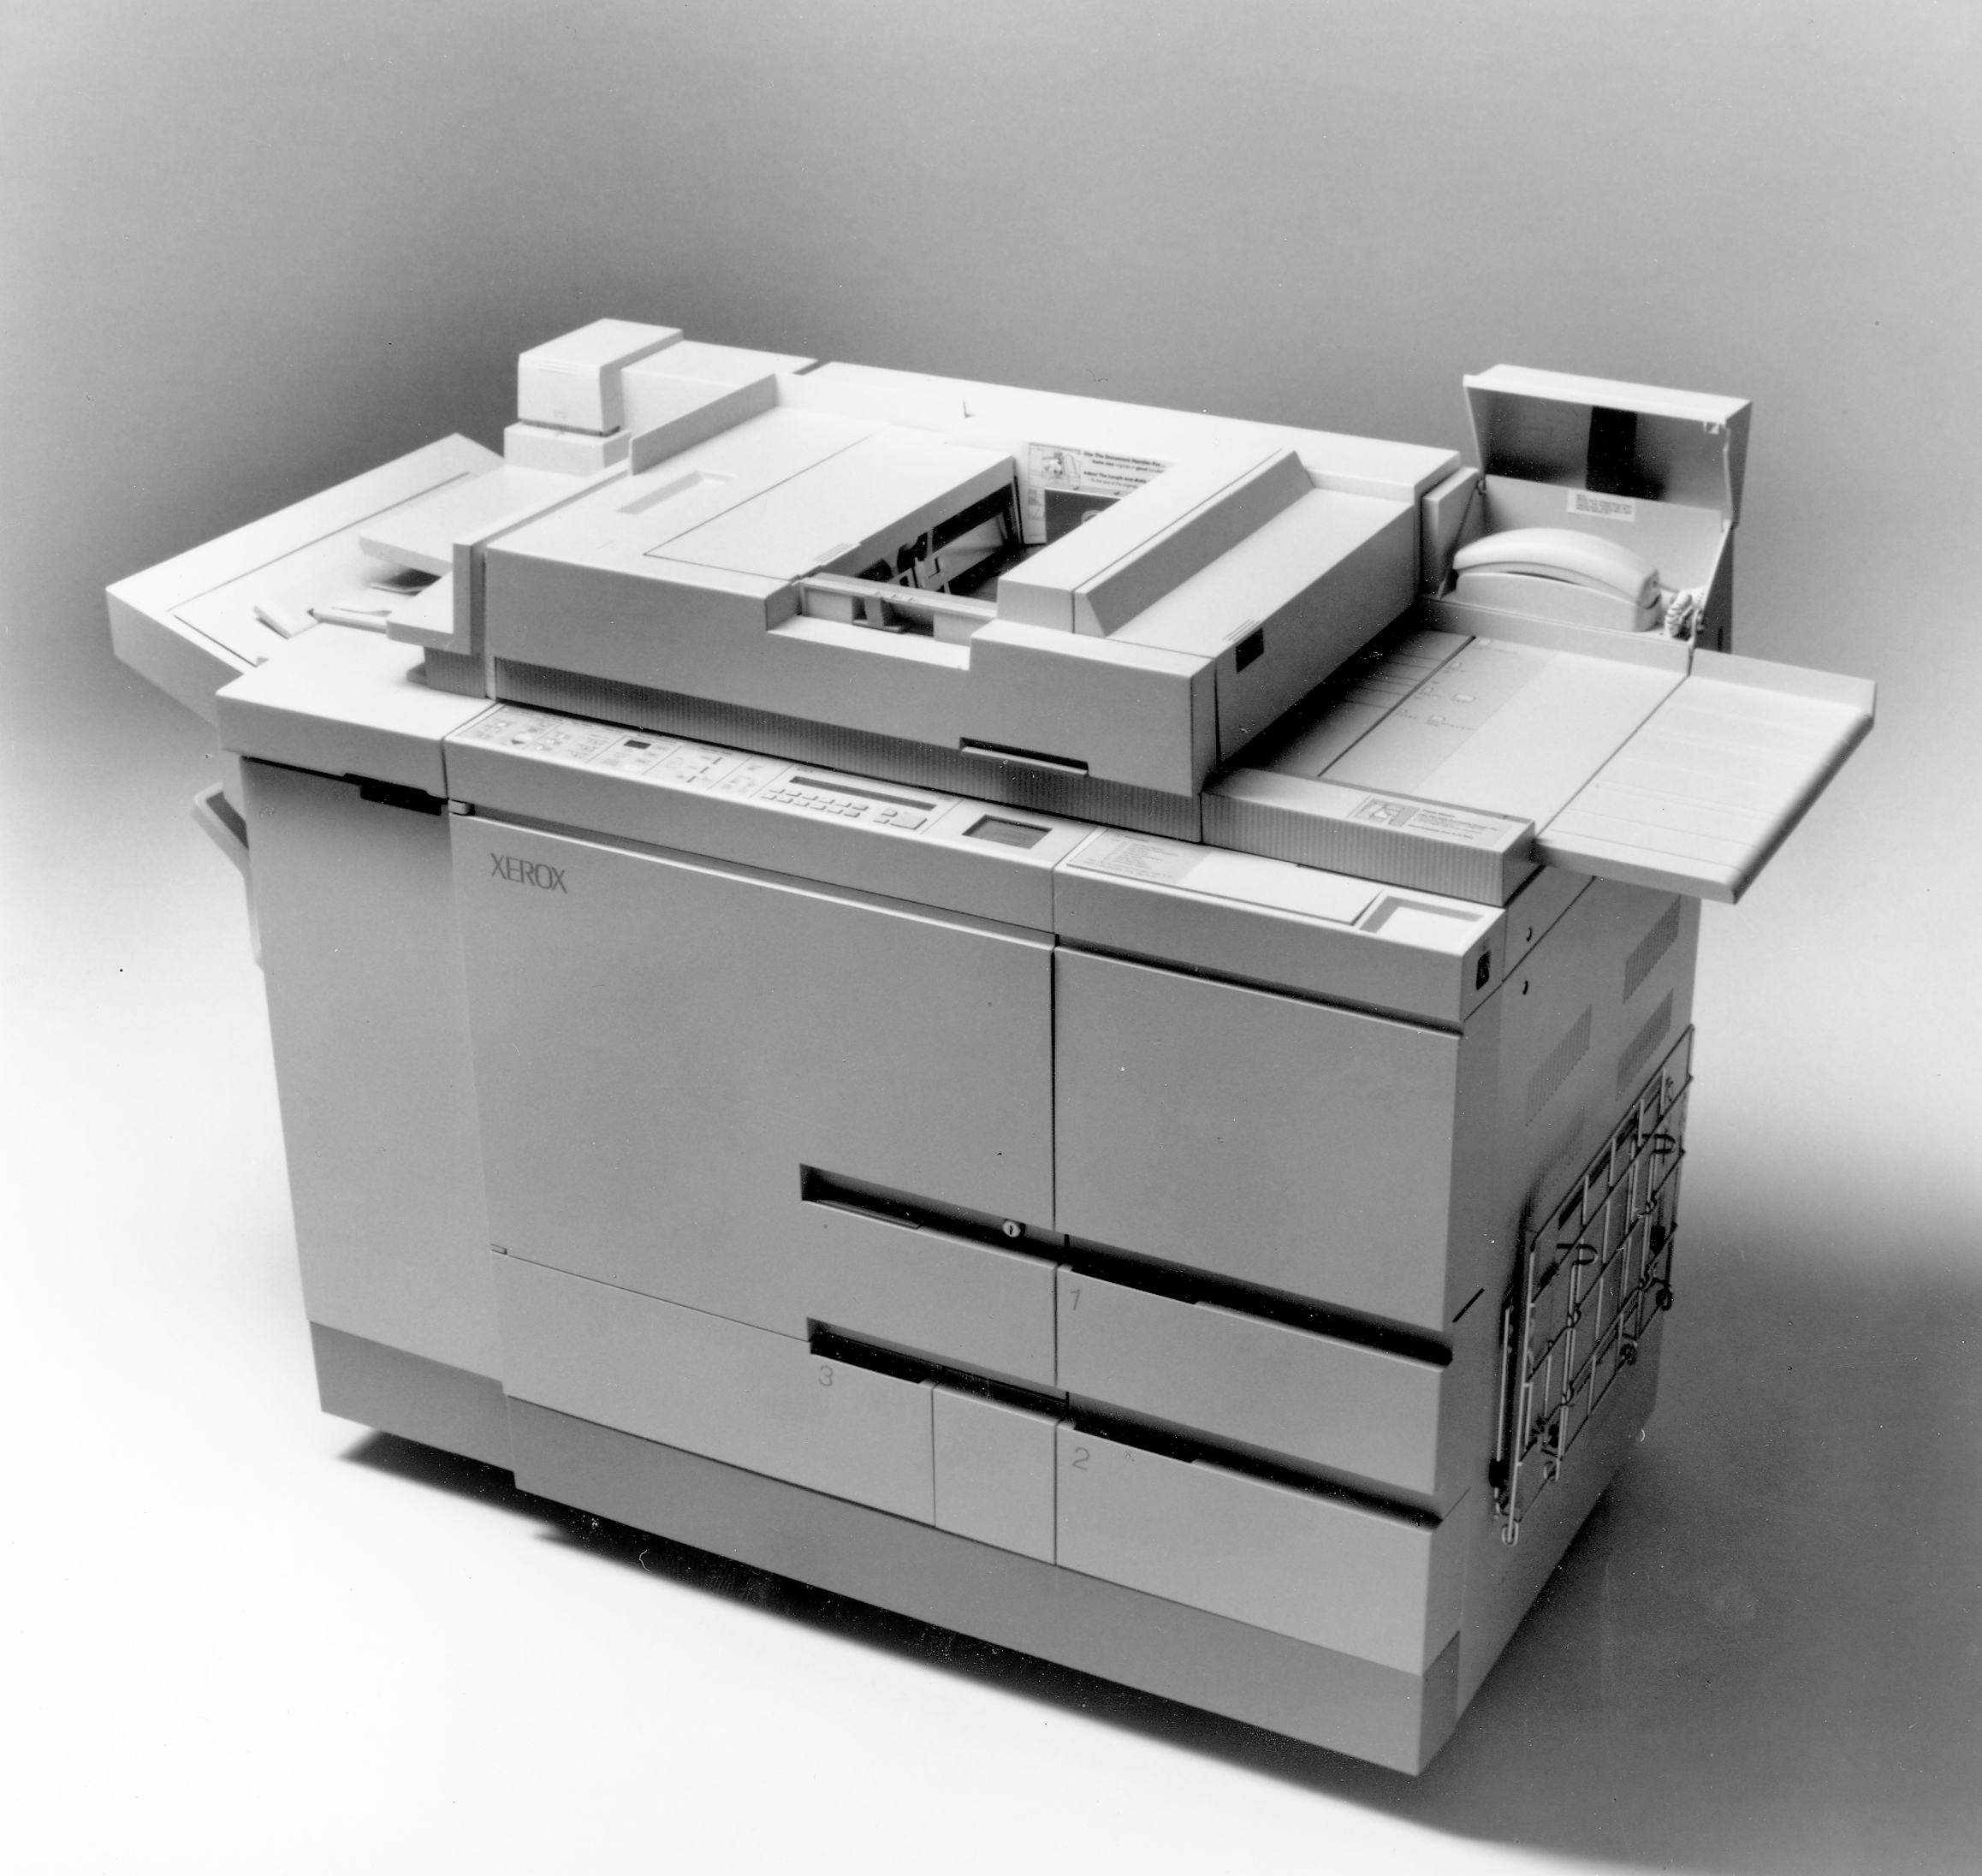 1990-5065: First Xerox copier with built-in Remote Interactive Communicatio...